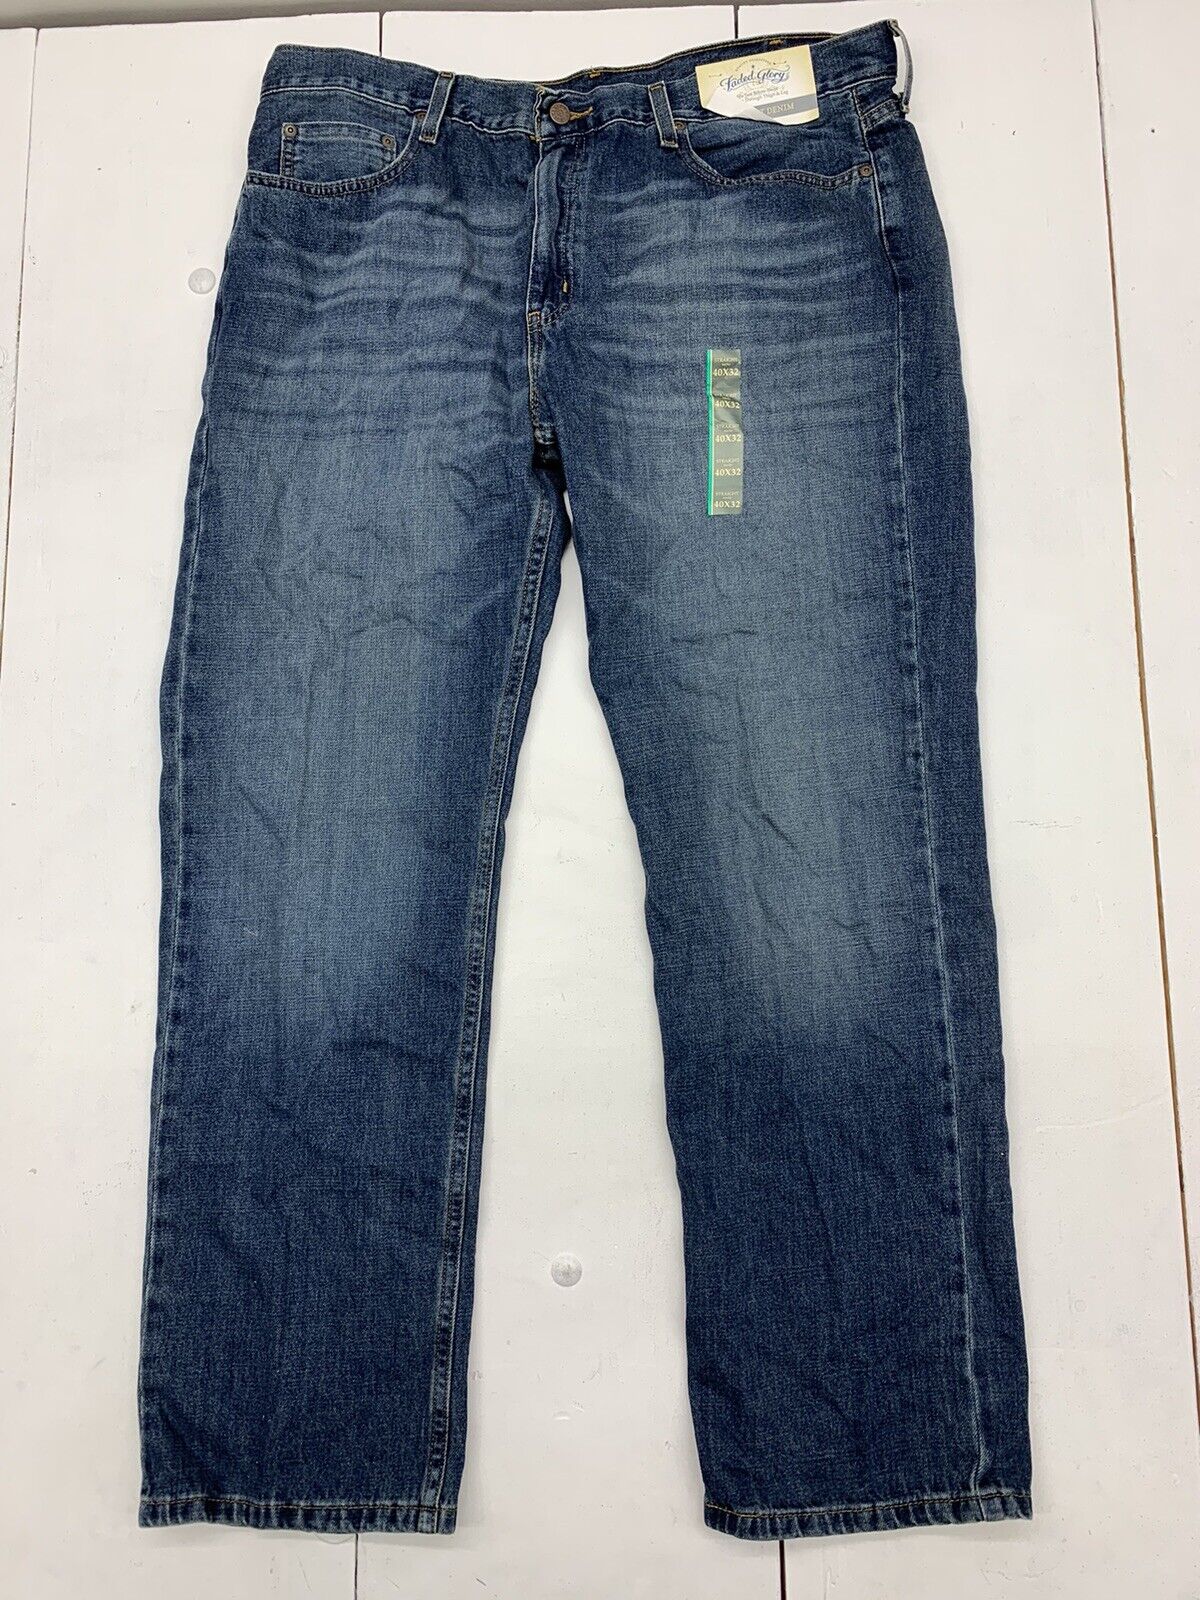 Faded Glory 100% Cotton Solid Blue Jeans Size 14 - 32% off